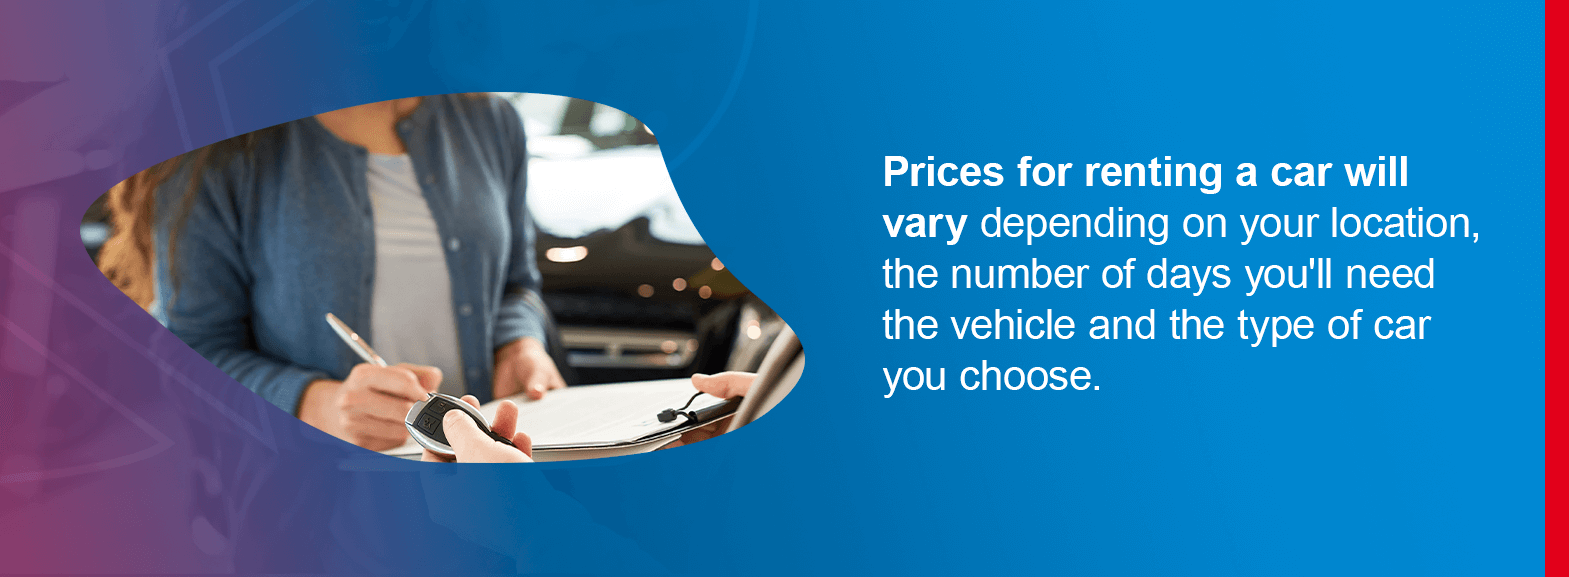 Prices for renting a car will vary depending on your location, the number of days you'll need the vehicle and the type of car you choose.